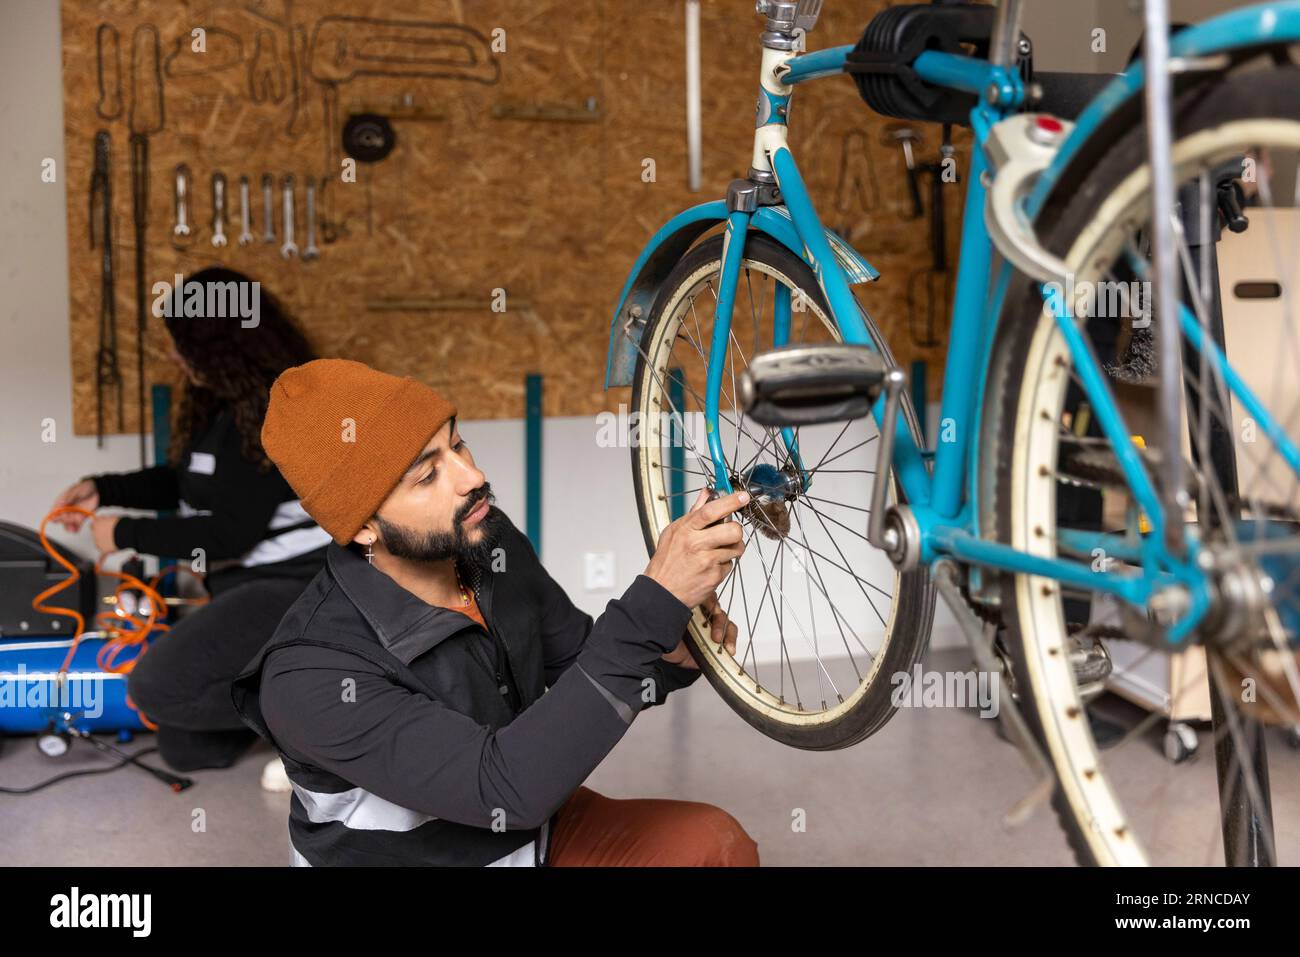 Male technician repairing bicycle wheel in workshop at recycling center Stock Photo